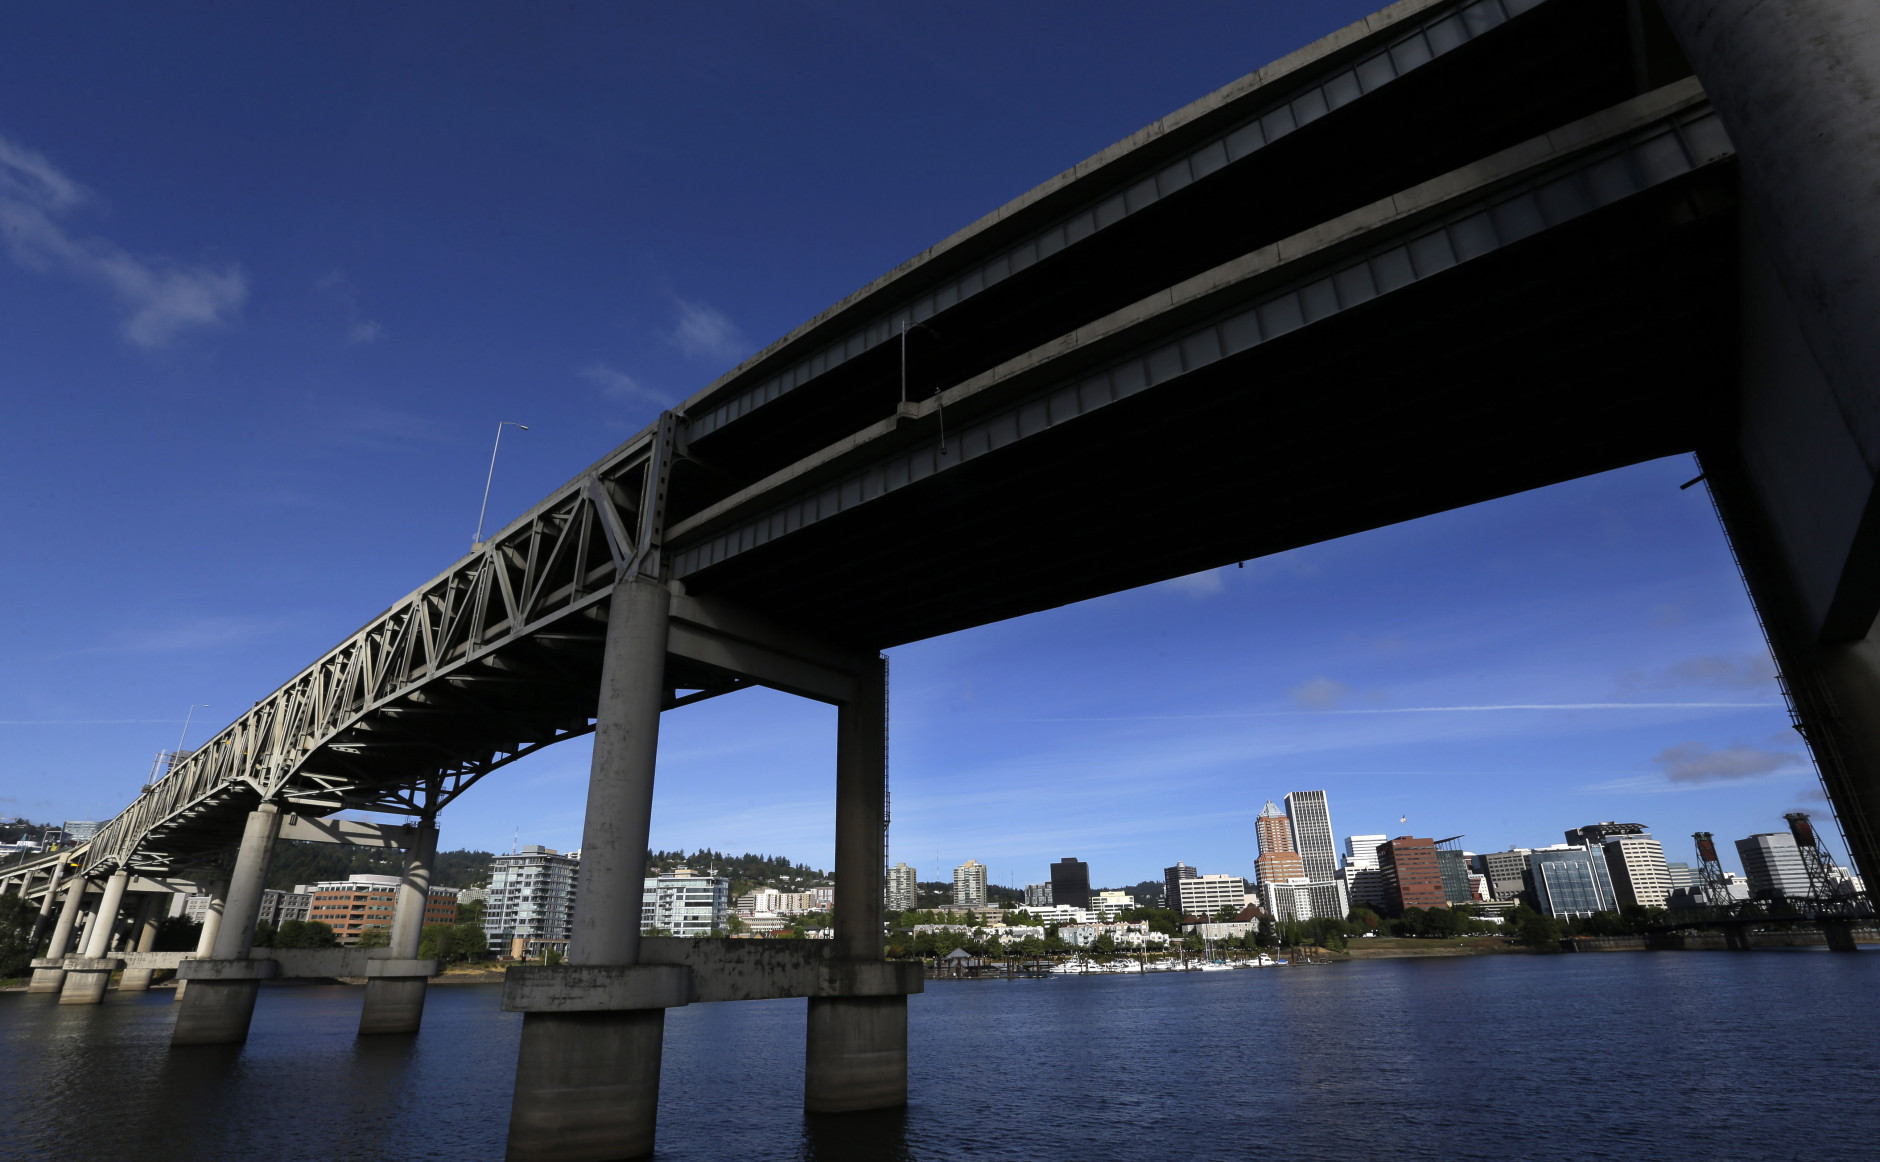 FILE - In this Aug. 4, 2015, file photo, downtown Portland, Ore., is visible under the Interstate-5 Marquam Bridge on the Willamette River. There are numerous bridges in Portland spanning the river, varying in age and ability to withstand a major earthquake. For the past few years emergency officials in the Pacific Northwest have been drafting detailed contingency plans for the day a mega-quake and tsunami hit the region. What planners envision is a massive response that would eclipse the response to any natural disaster so far in U.S. history.  (AP Photo/Don Ryan, File)